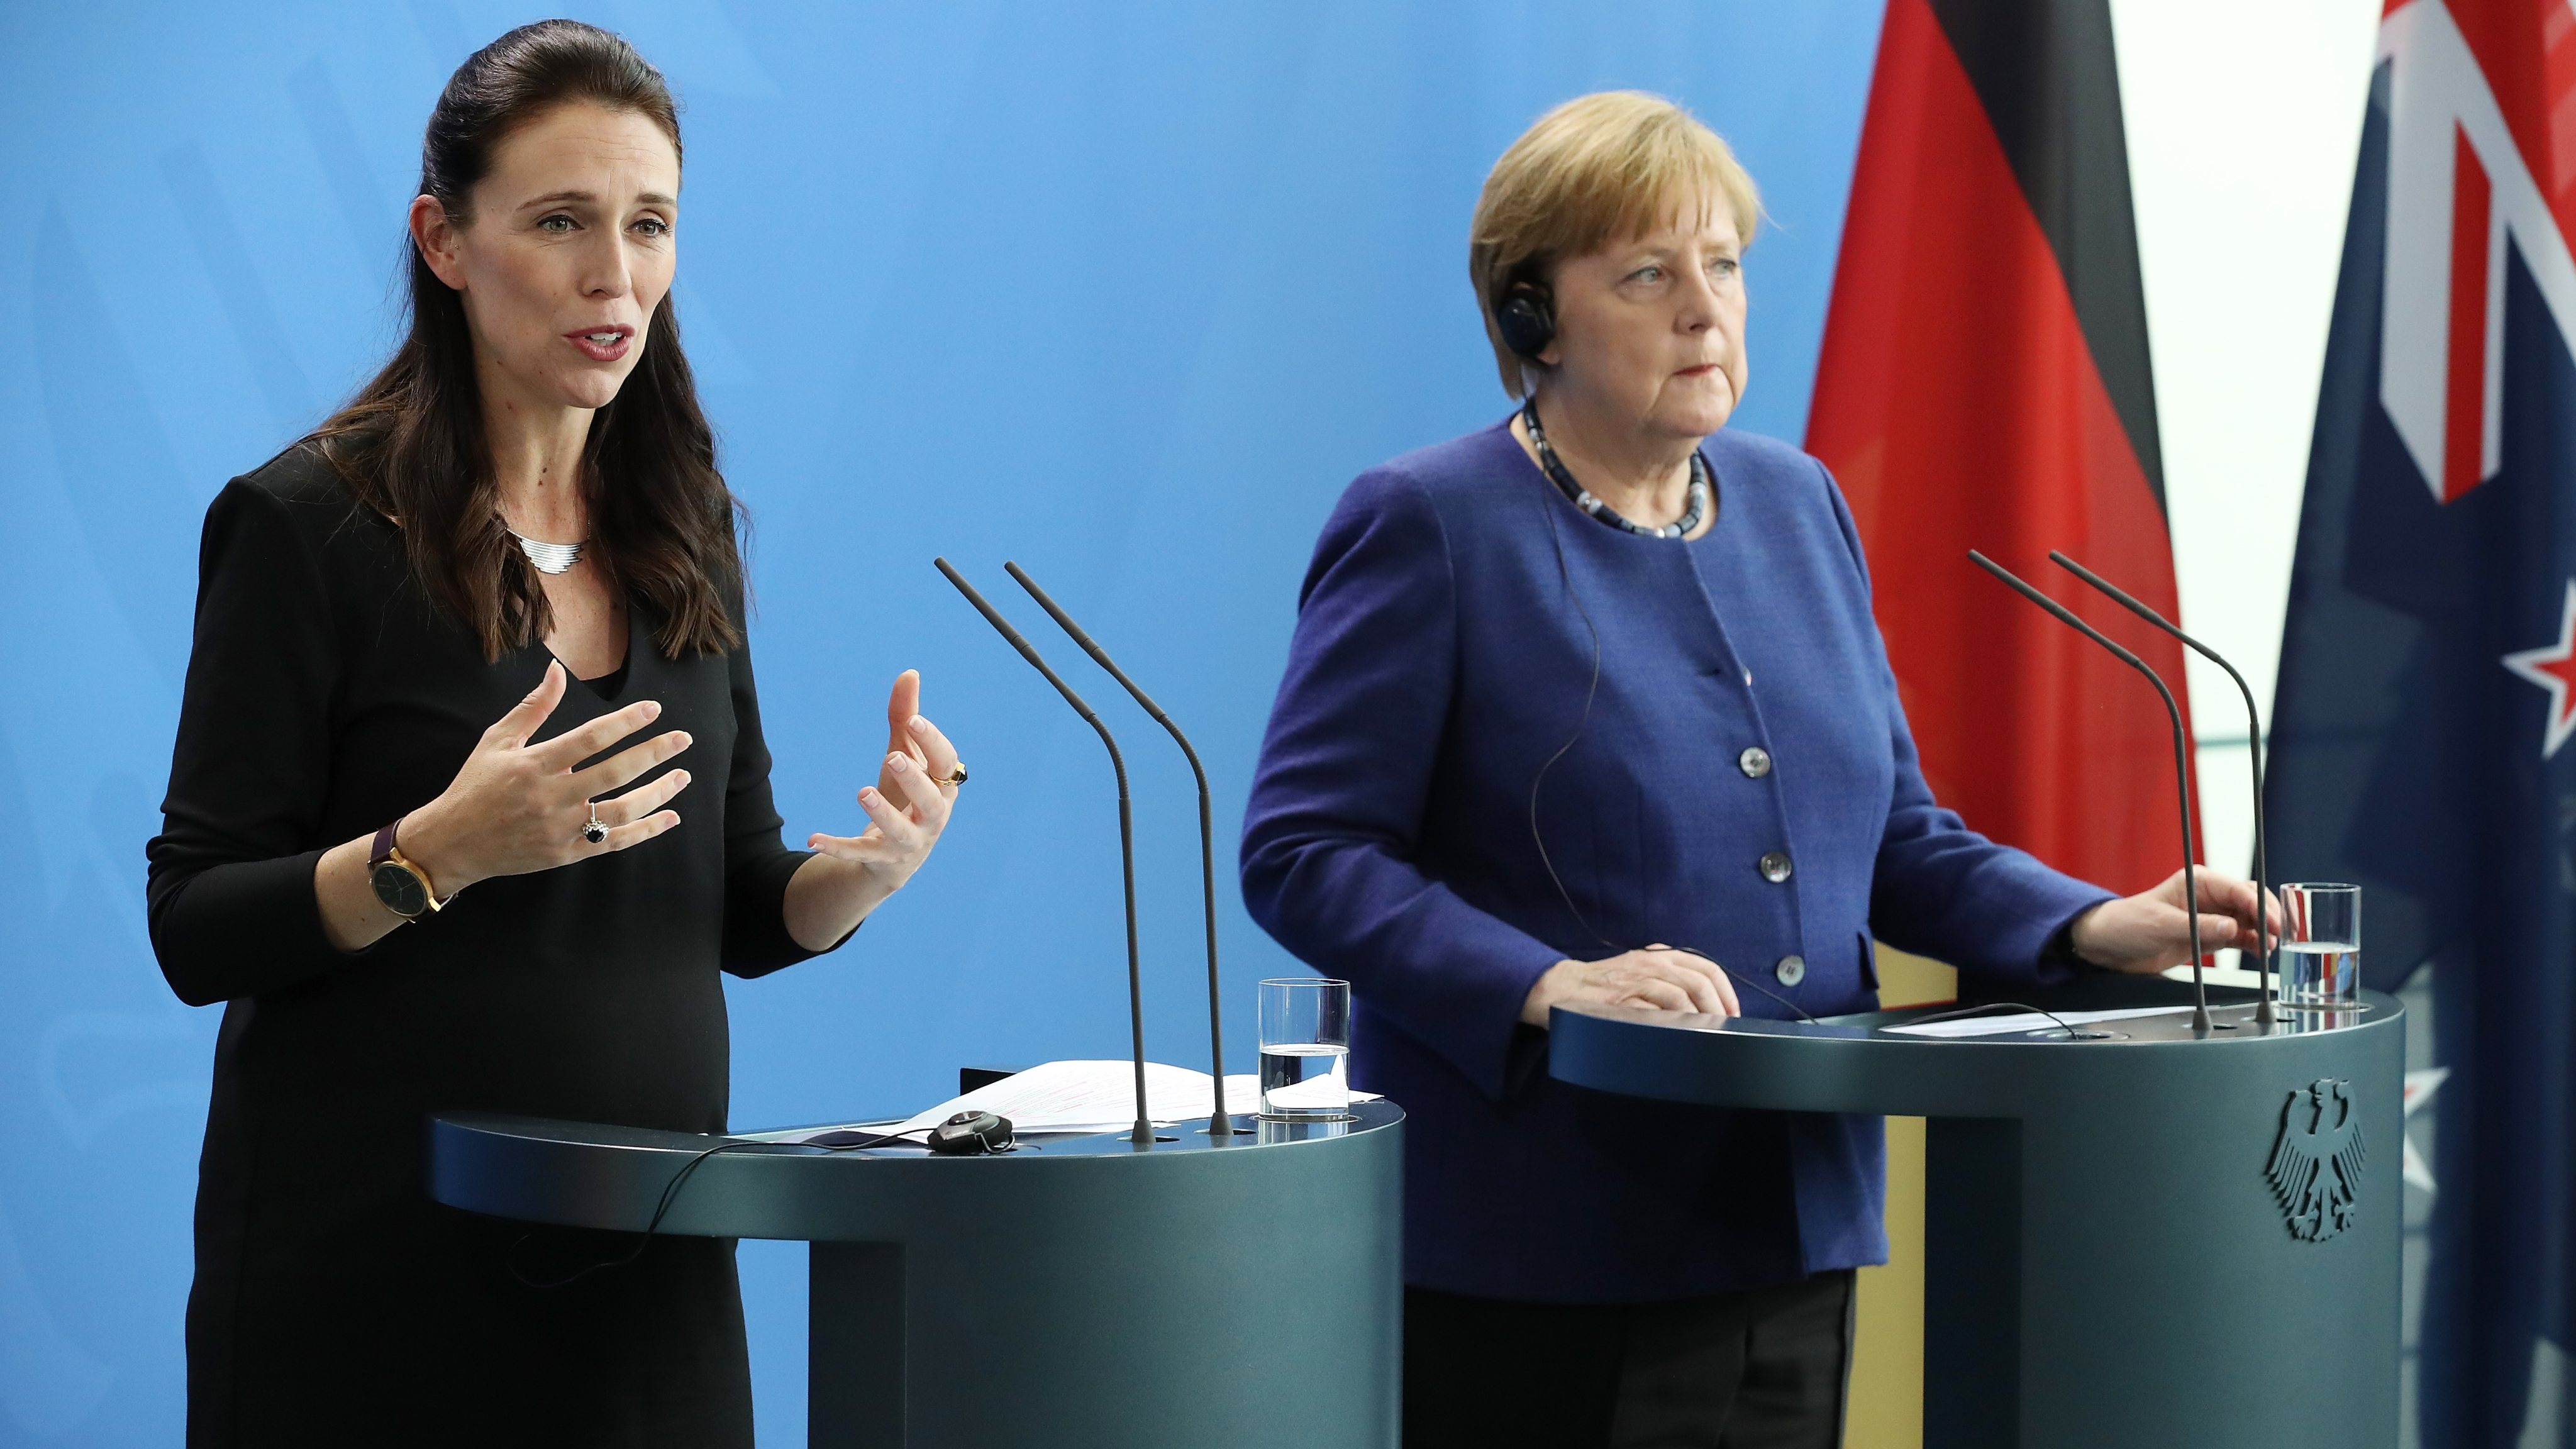 New Zealand Prime Minister Ardern Visits Berlin